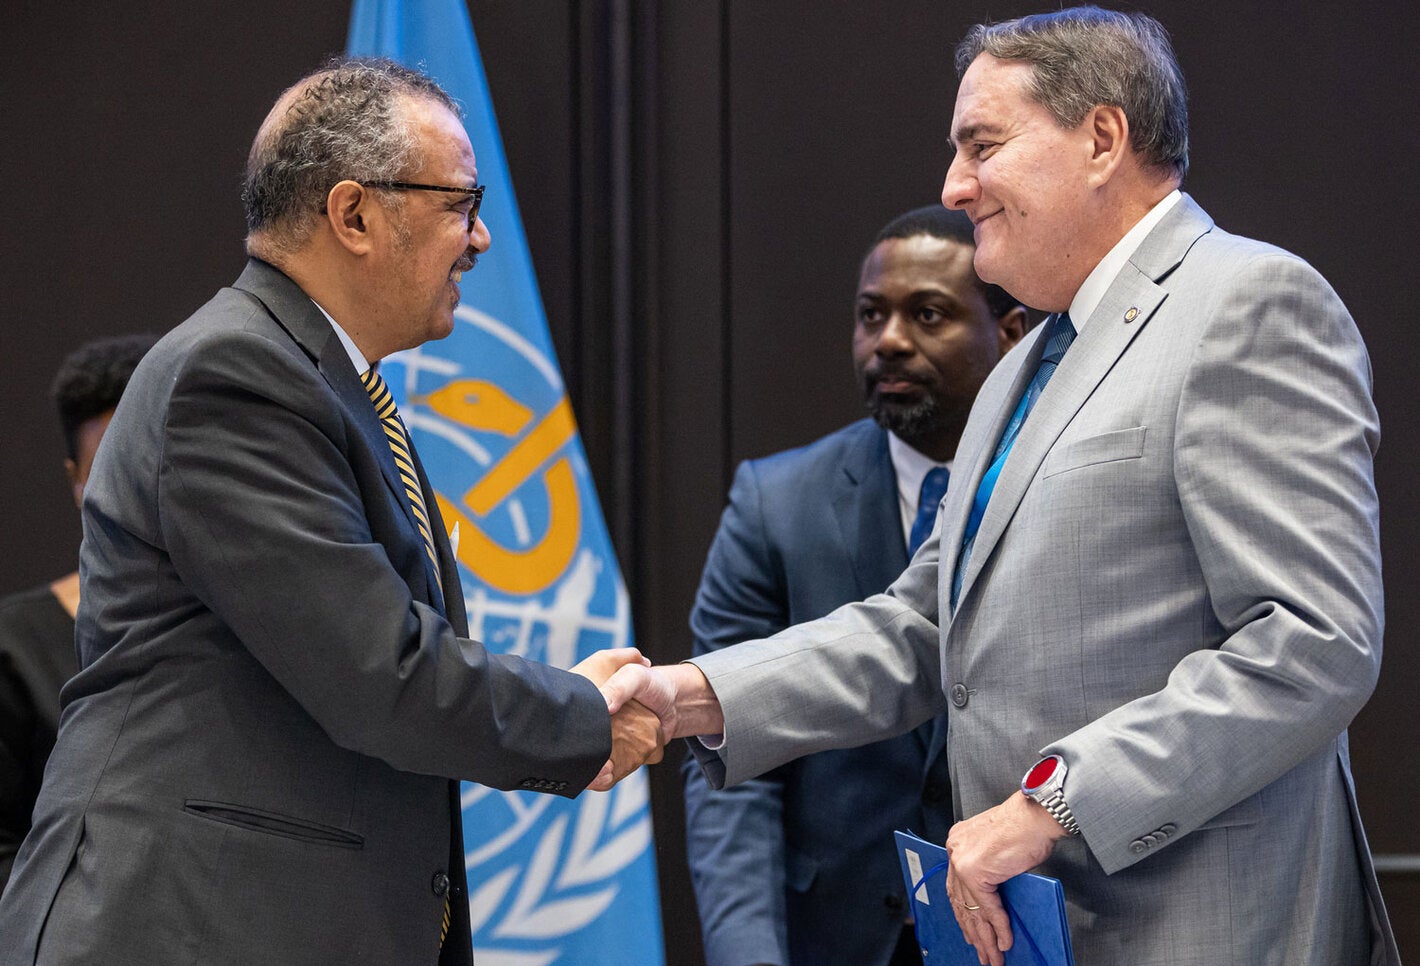 Dr. Jarbas Barbosa elected as WHO Regional Director for the Americas